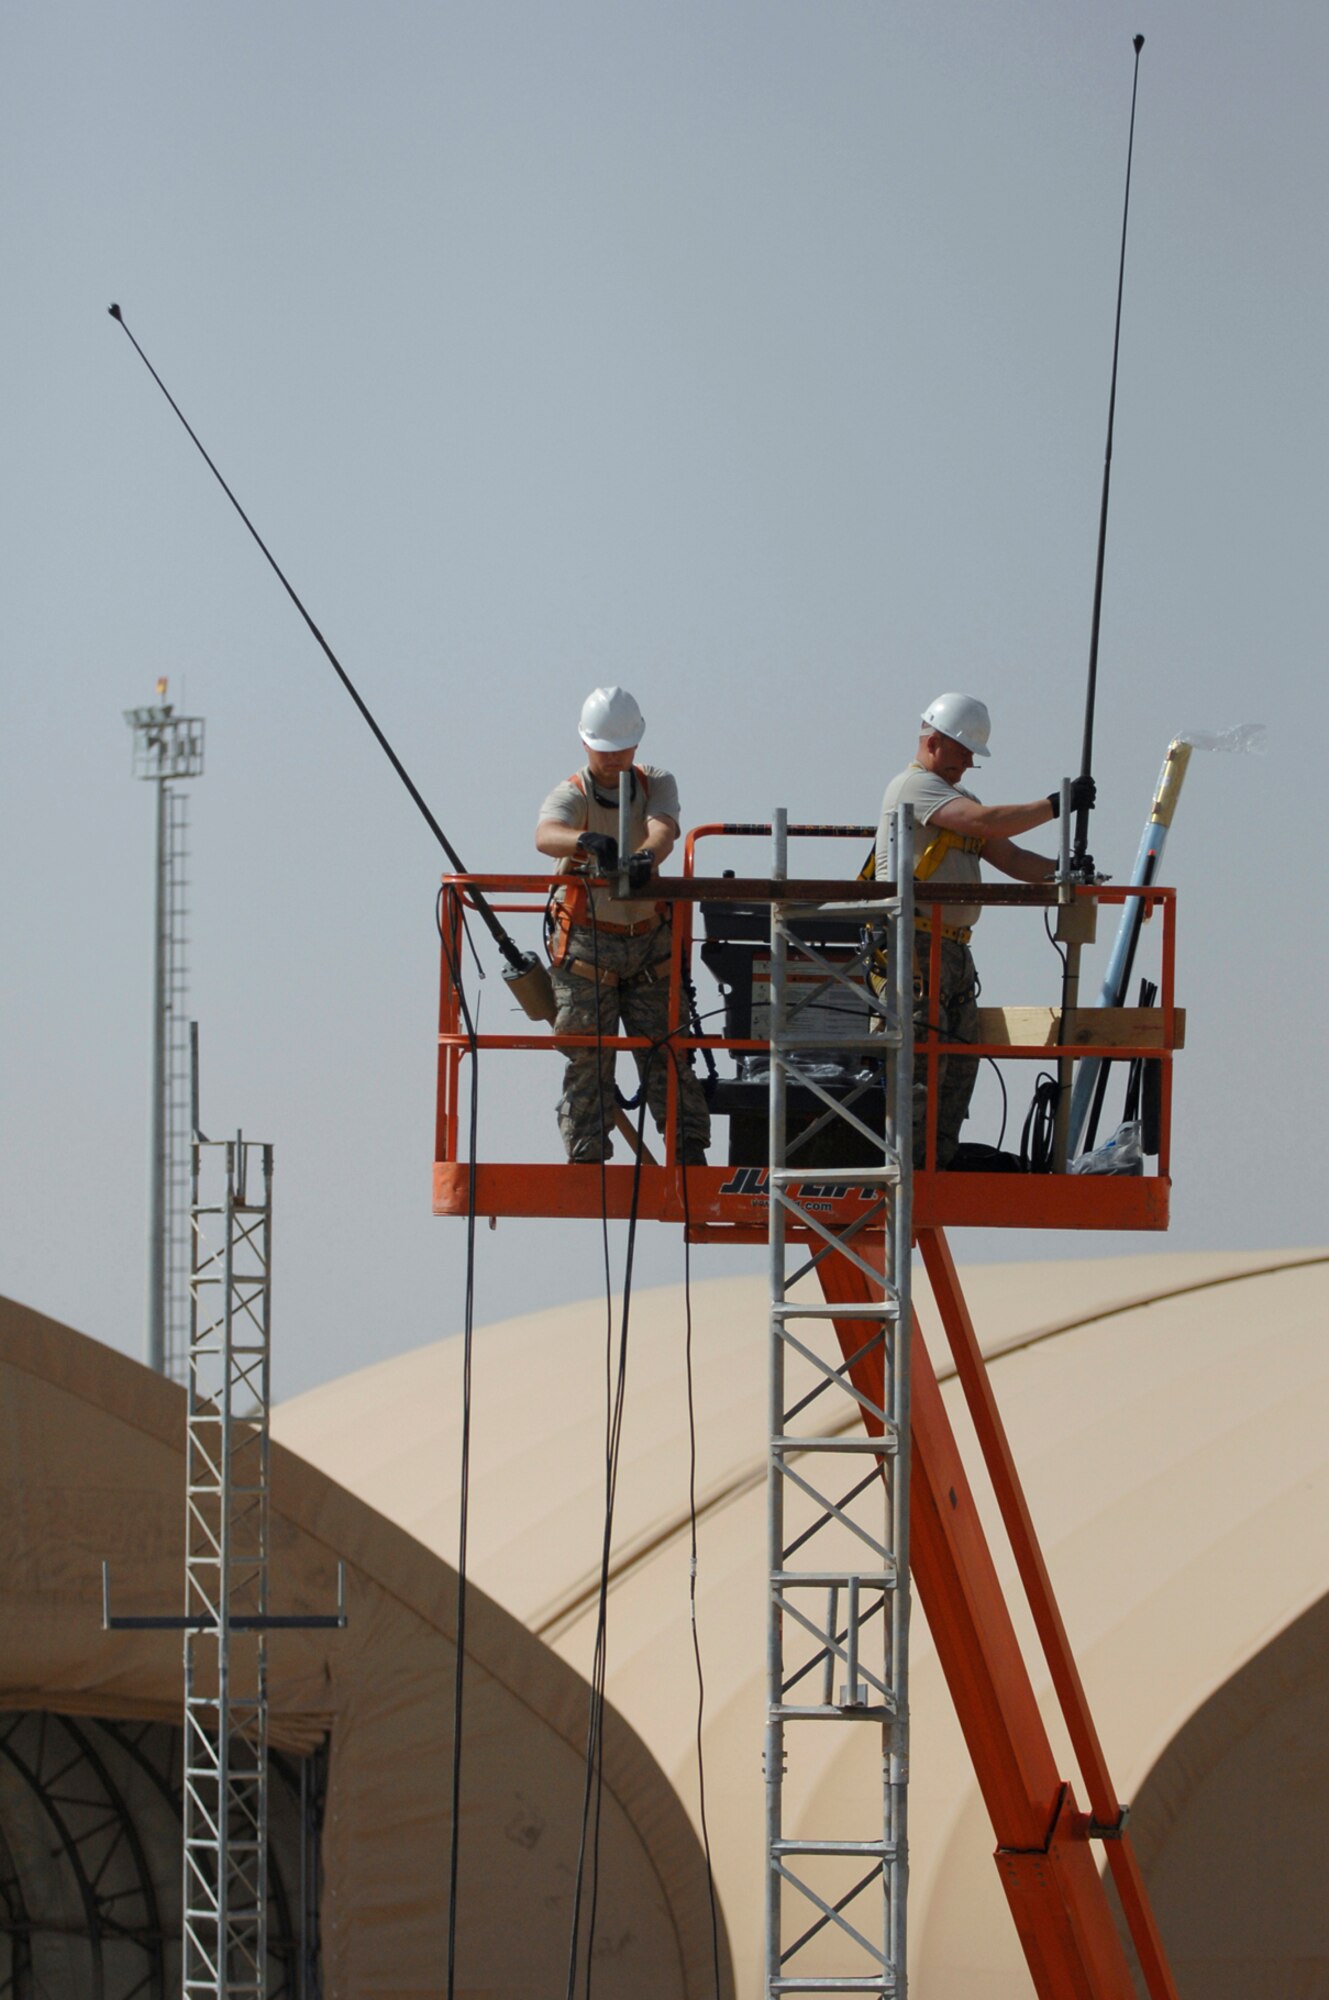 JOINT BASE BALAD, Iraq -- Senior Airman Paul Martin and Tech. Sgt. Robert Fisher, 332nd Expeditionary Communications Squadron ground radio maintainers, install very high frequency radio antennas which will be used for future ground to air tactical radio communications and provide more land mobile radio capabilities for ground operations here, June 21. Airman Martin is deployed from Yokota Air Base, Japan, and Sergeant Fisher is deployed from Youngstown Air Reserve Base, Ohio. (U.S. Air Force photo/ Senior Airman Julianne Showalter)